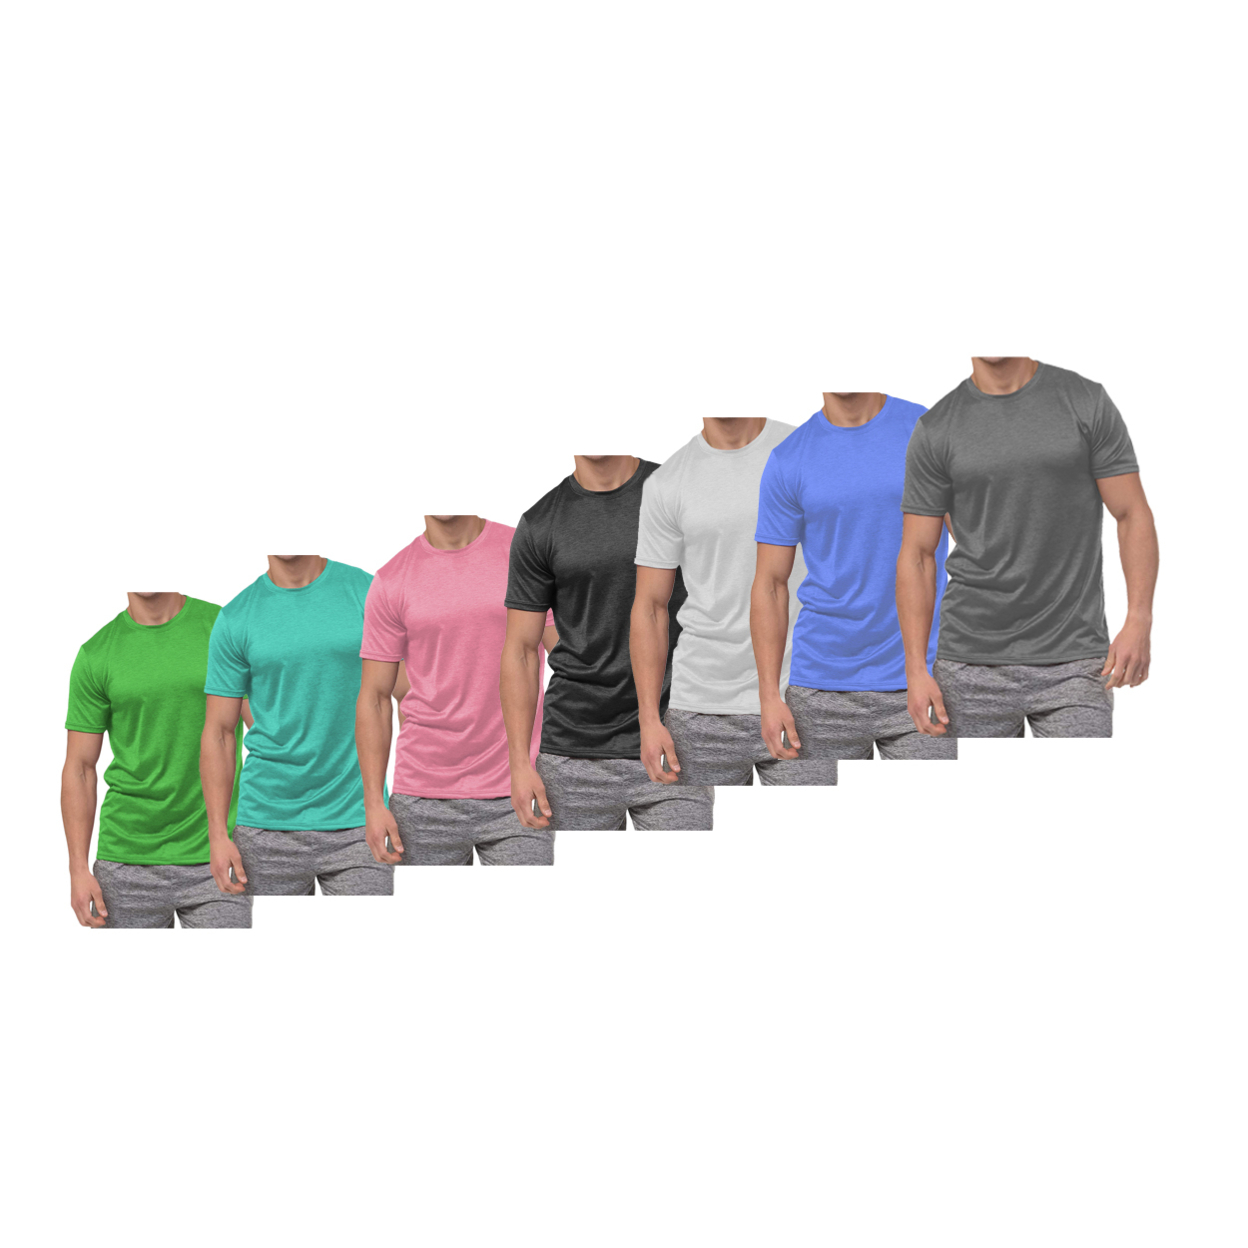 5-Pack: Men's Active Moisture Wicking Dry Fit Crew Neck Shirts - Large